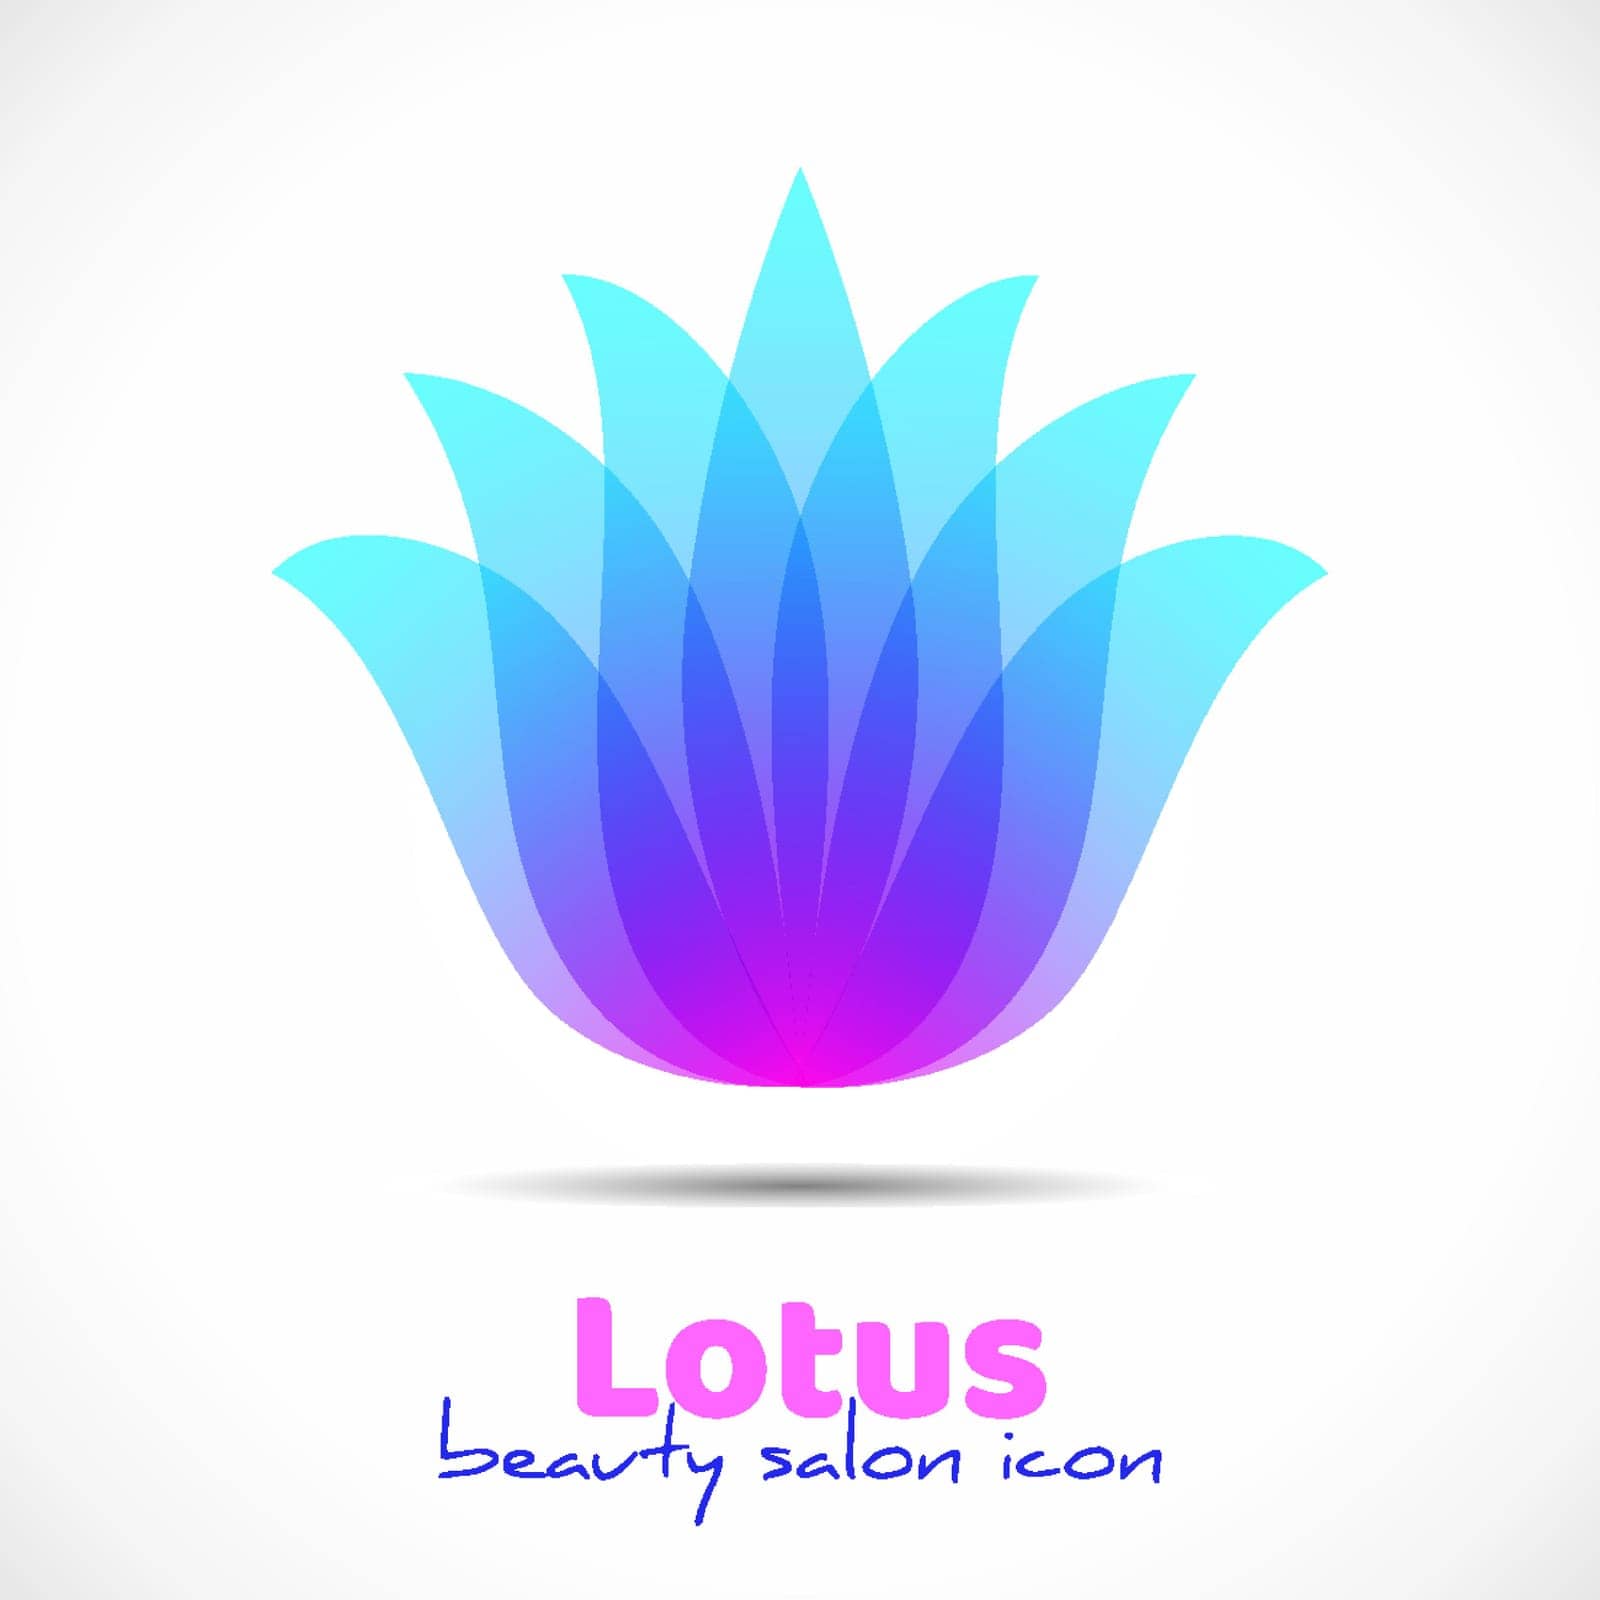 Lotus logotype design template. Vector flower symbol for beauty salon, spa or cosmetics brand style,